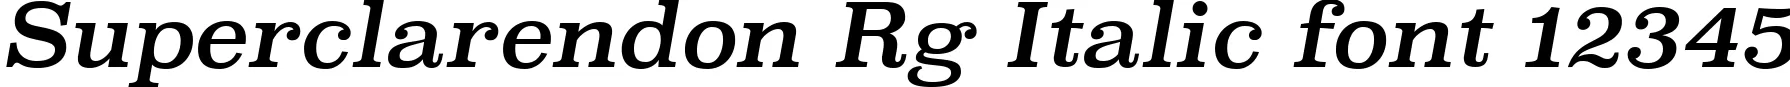 Dynamic Superclarendon Rg Italic Font Preview https://safirsoft.com